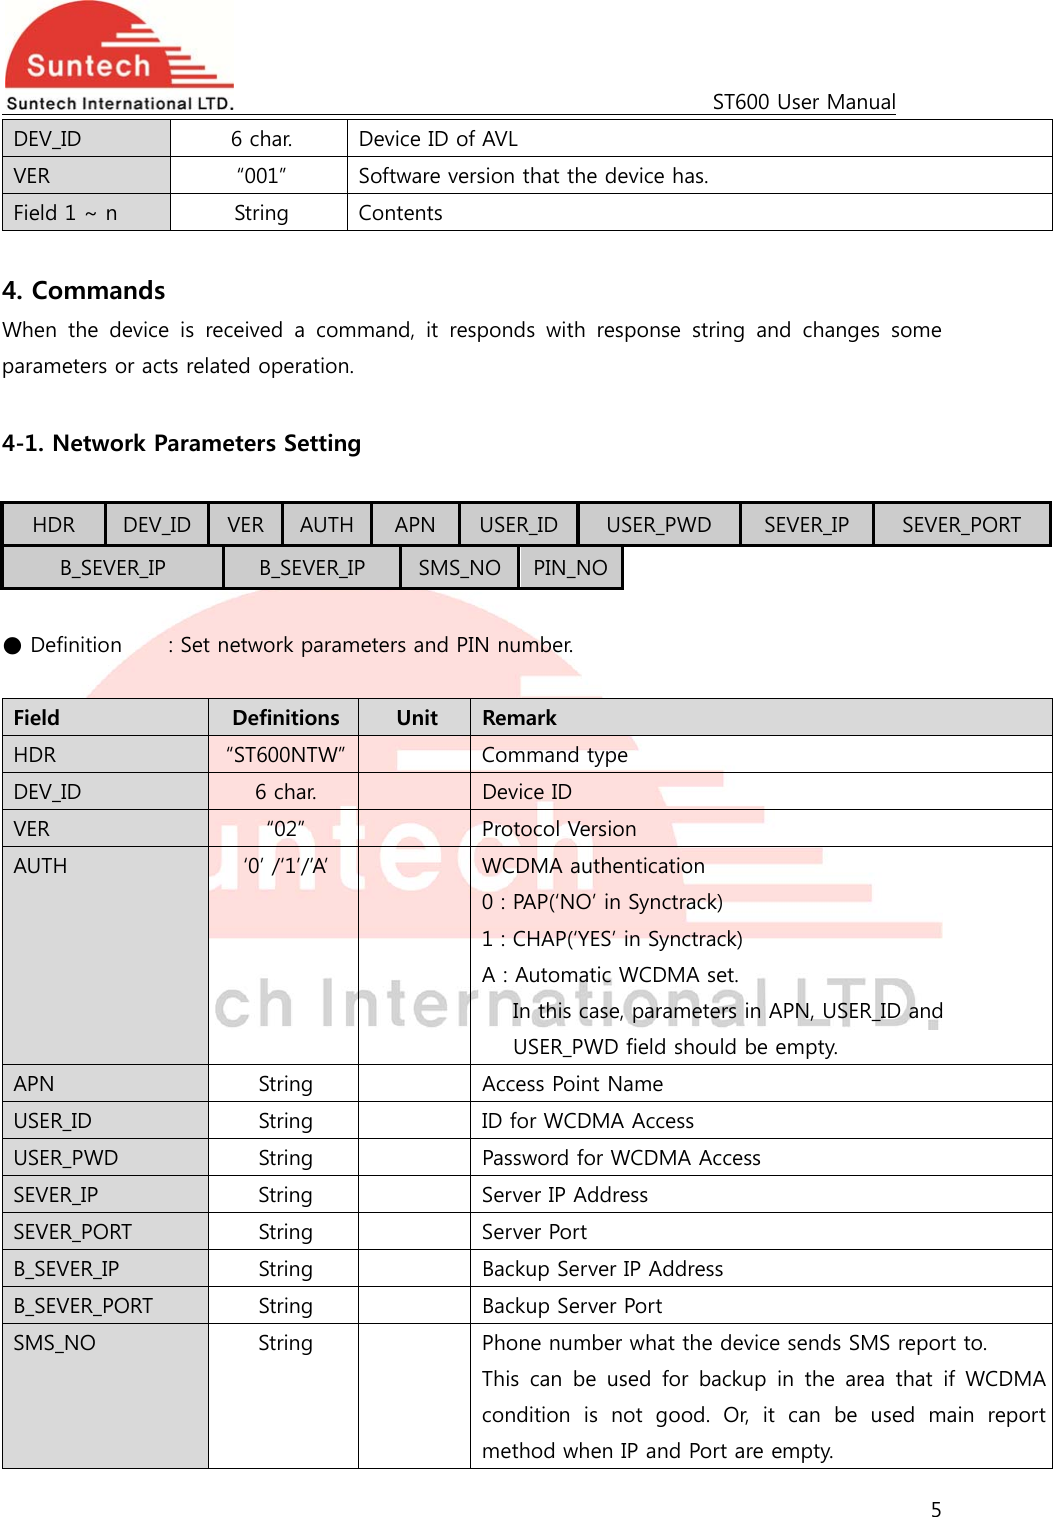                                                                                             ST600 User Manual 5  DEV_ID  6 char.  Device ID of AVL VER  “001”  Software version that the device has. Field 1 ~ n  String  Contents  4. Commands When  the  device  is  received  a  command,  it  responds  with  response  string  and  changes  some parameters or acts related operation.  4-1. Network Parameters Setting  HDR  DEV_ID  VER  AUTH  APN  USER_ID USER_PWD  SEVER_IP  SEVER_PORT B_SEVER_IP  B_SEVER_IP  SMS_NO PIN_NO ● Definition   : Set network parameters and PIN number.  Field  Definitions  Unit  Remark HDR  “ST600NTW”    Command type DEV_ID  6 char.    Device ID VER  “02”    Protocol Version AUTH  ‘0’ /‘1’/’A’    WCDMA authentication 0 : PAP(‘NO’ in Synctrack) 1 : CHAP(‘YES’ in Synctrack) A : Automatic WCDMA set.   In this case, parameters in APN, USER_ID and   USER_PWD field should be empty. APN  String    Access Point Name USER_ID  String    ID for WCDMA Access USER_PWD  String    Password for WCDMA Access SEVER_IP  String    Server IP Address SEVER_PORT  String    Server Port B_SEVER_IP  String    Backup Server IP Address B_SEVER_PORT  String    Backup Server Port SMS_NO  String    Phone number what the device sends SMS report to. This can be used for backup in the area that if WCDMAcondition  is  not  good.  Or,  it  can  be  used  main  report method when IP and Port are empty. 